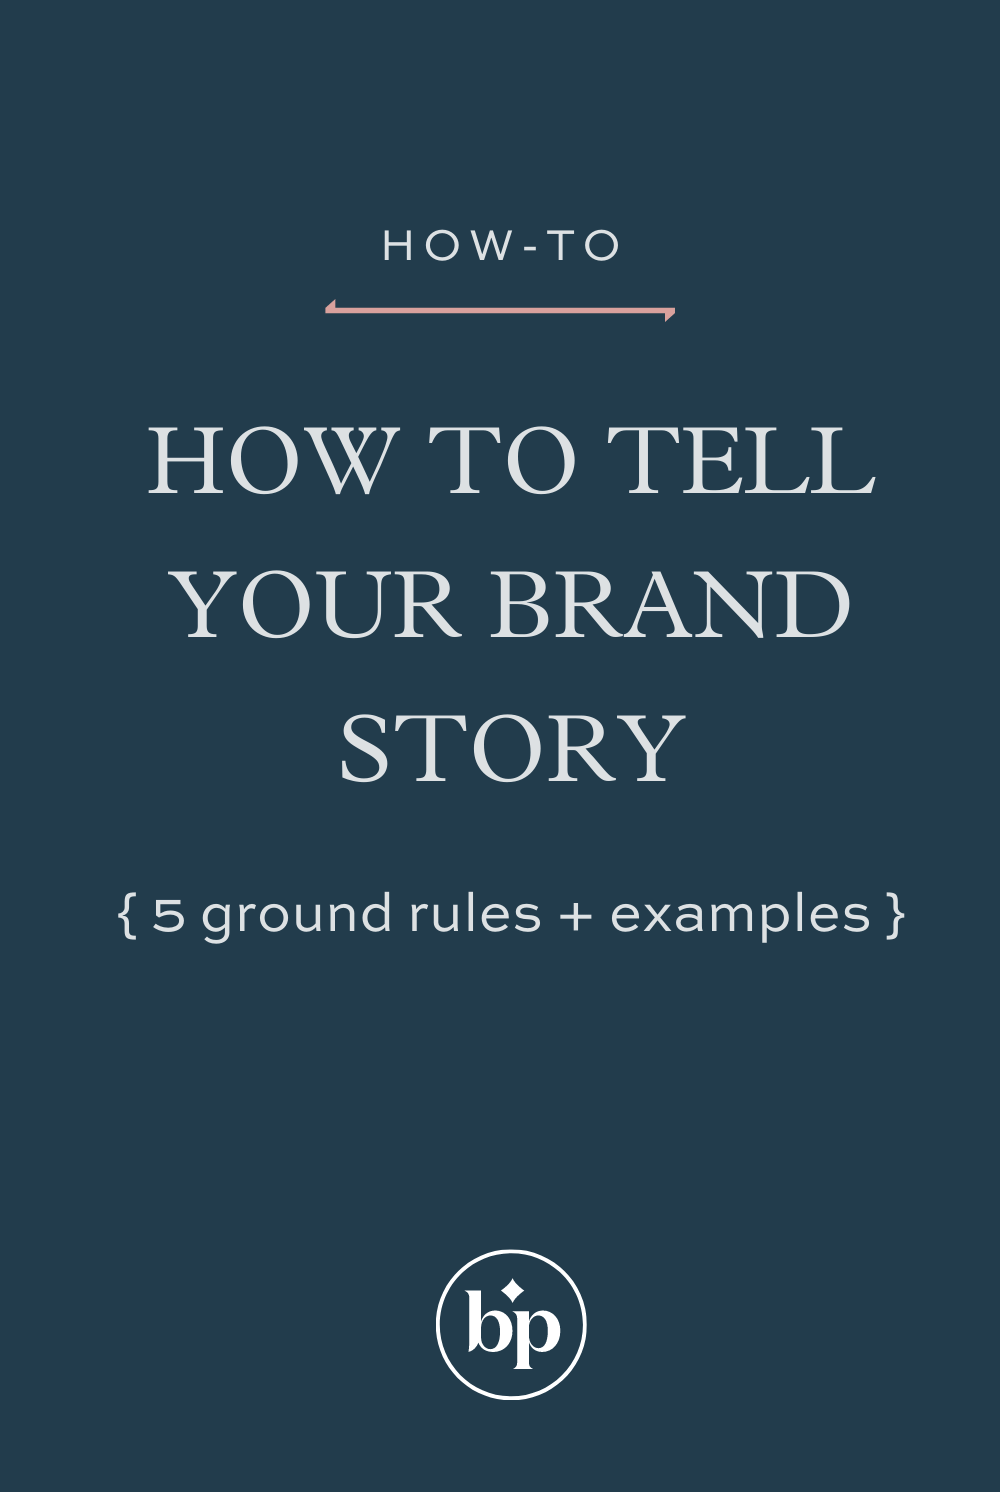 how-to-tell-your-brand-story.png